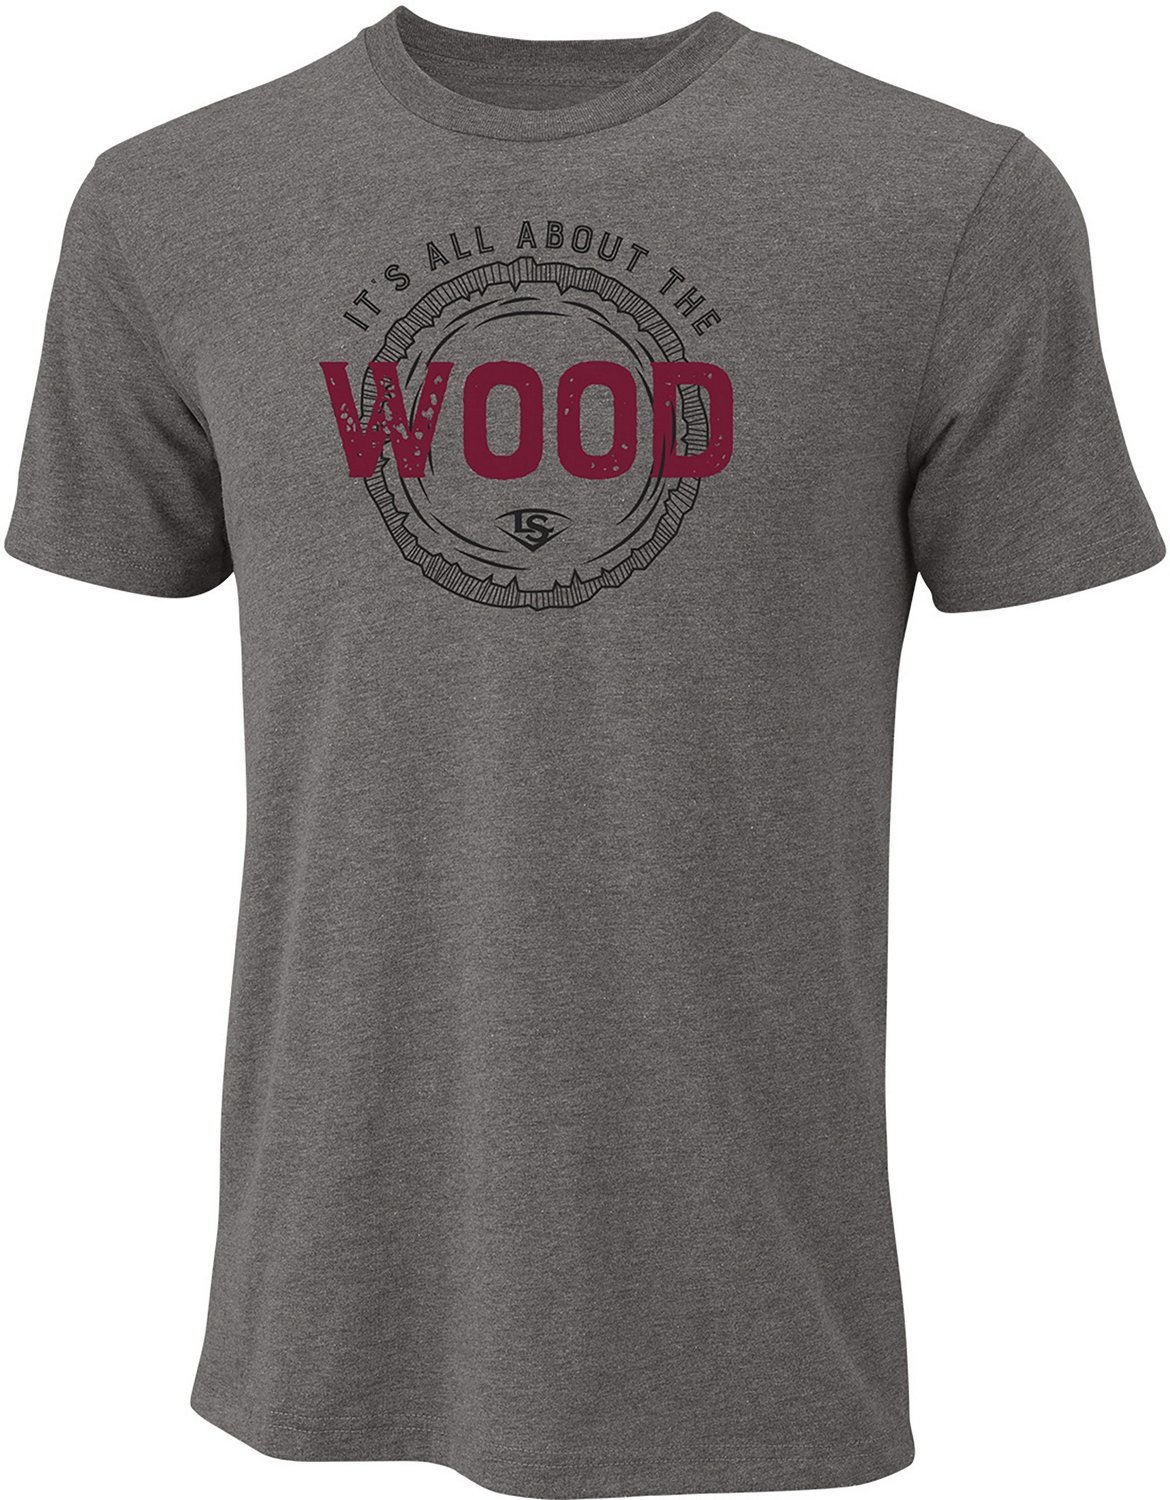 Louisville Slugger Adults' All About the Wood Graphic T-shirt